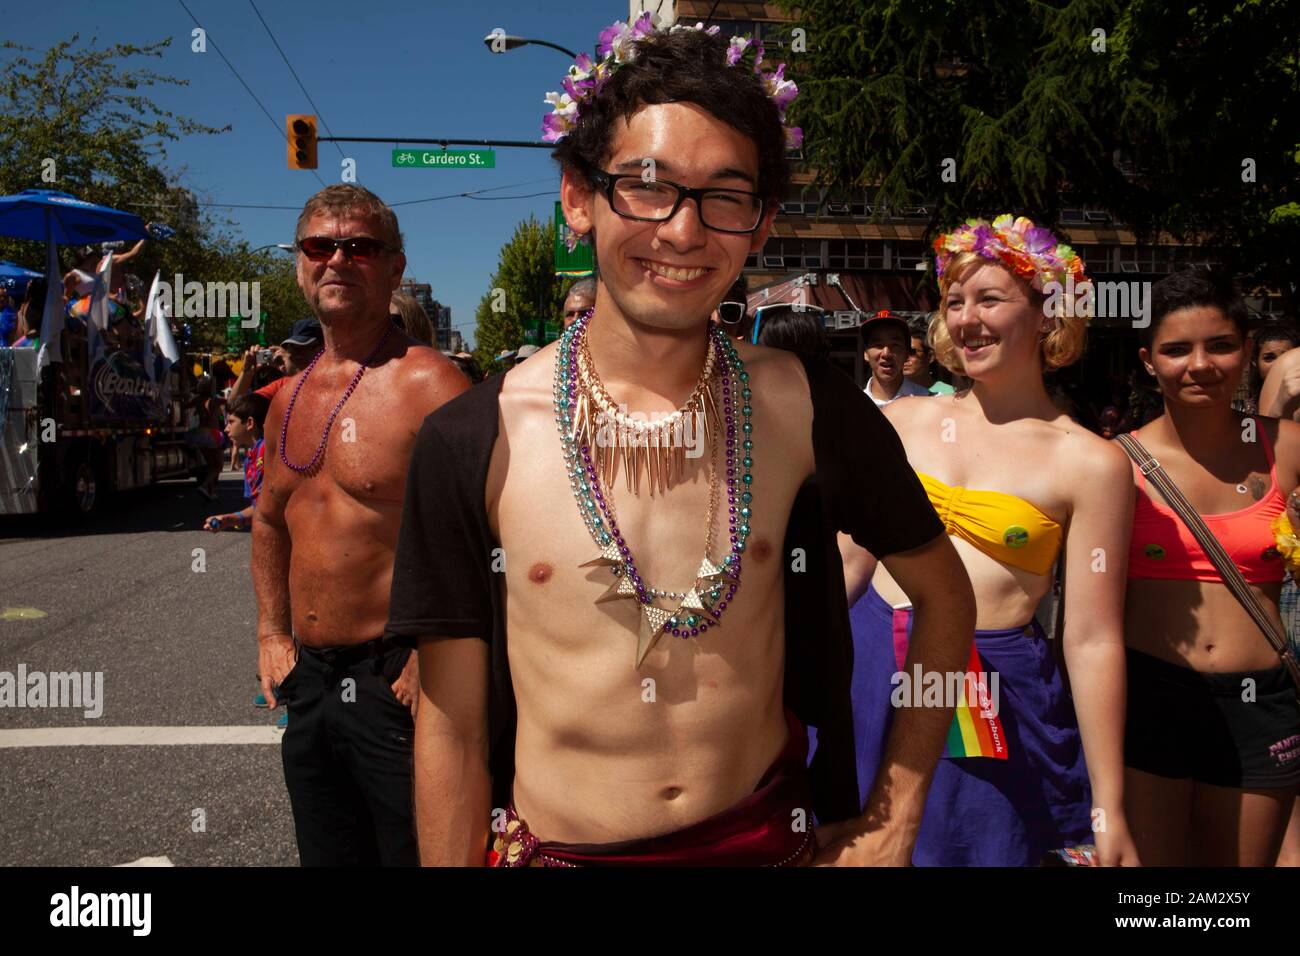 Pride parade participant posing in floral headband in street, crowd in background, Vancouver Pride Festival 2014, Vancouver, Canada Stock Photo